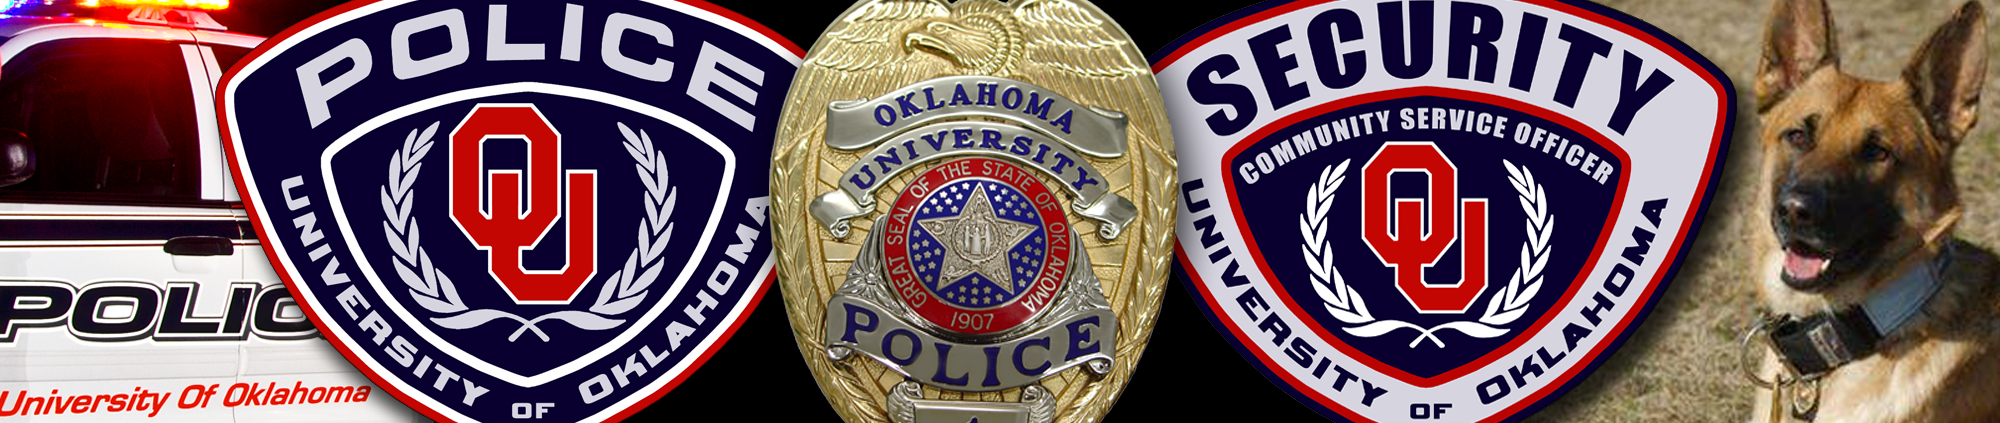 University of Oklahoma Police Department -- The Police Notebook